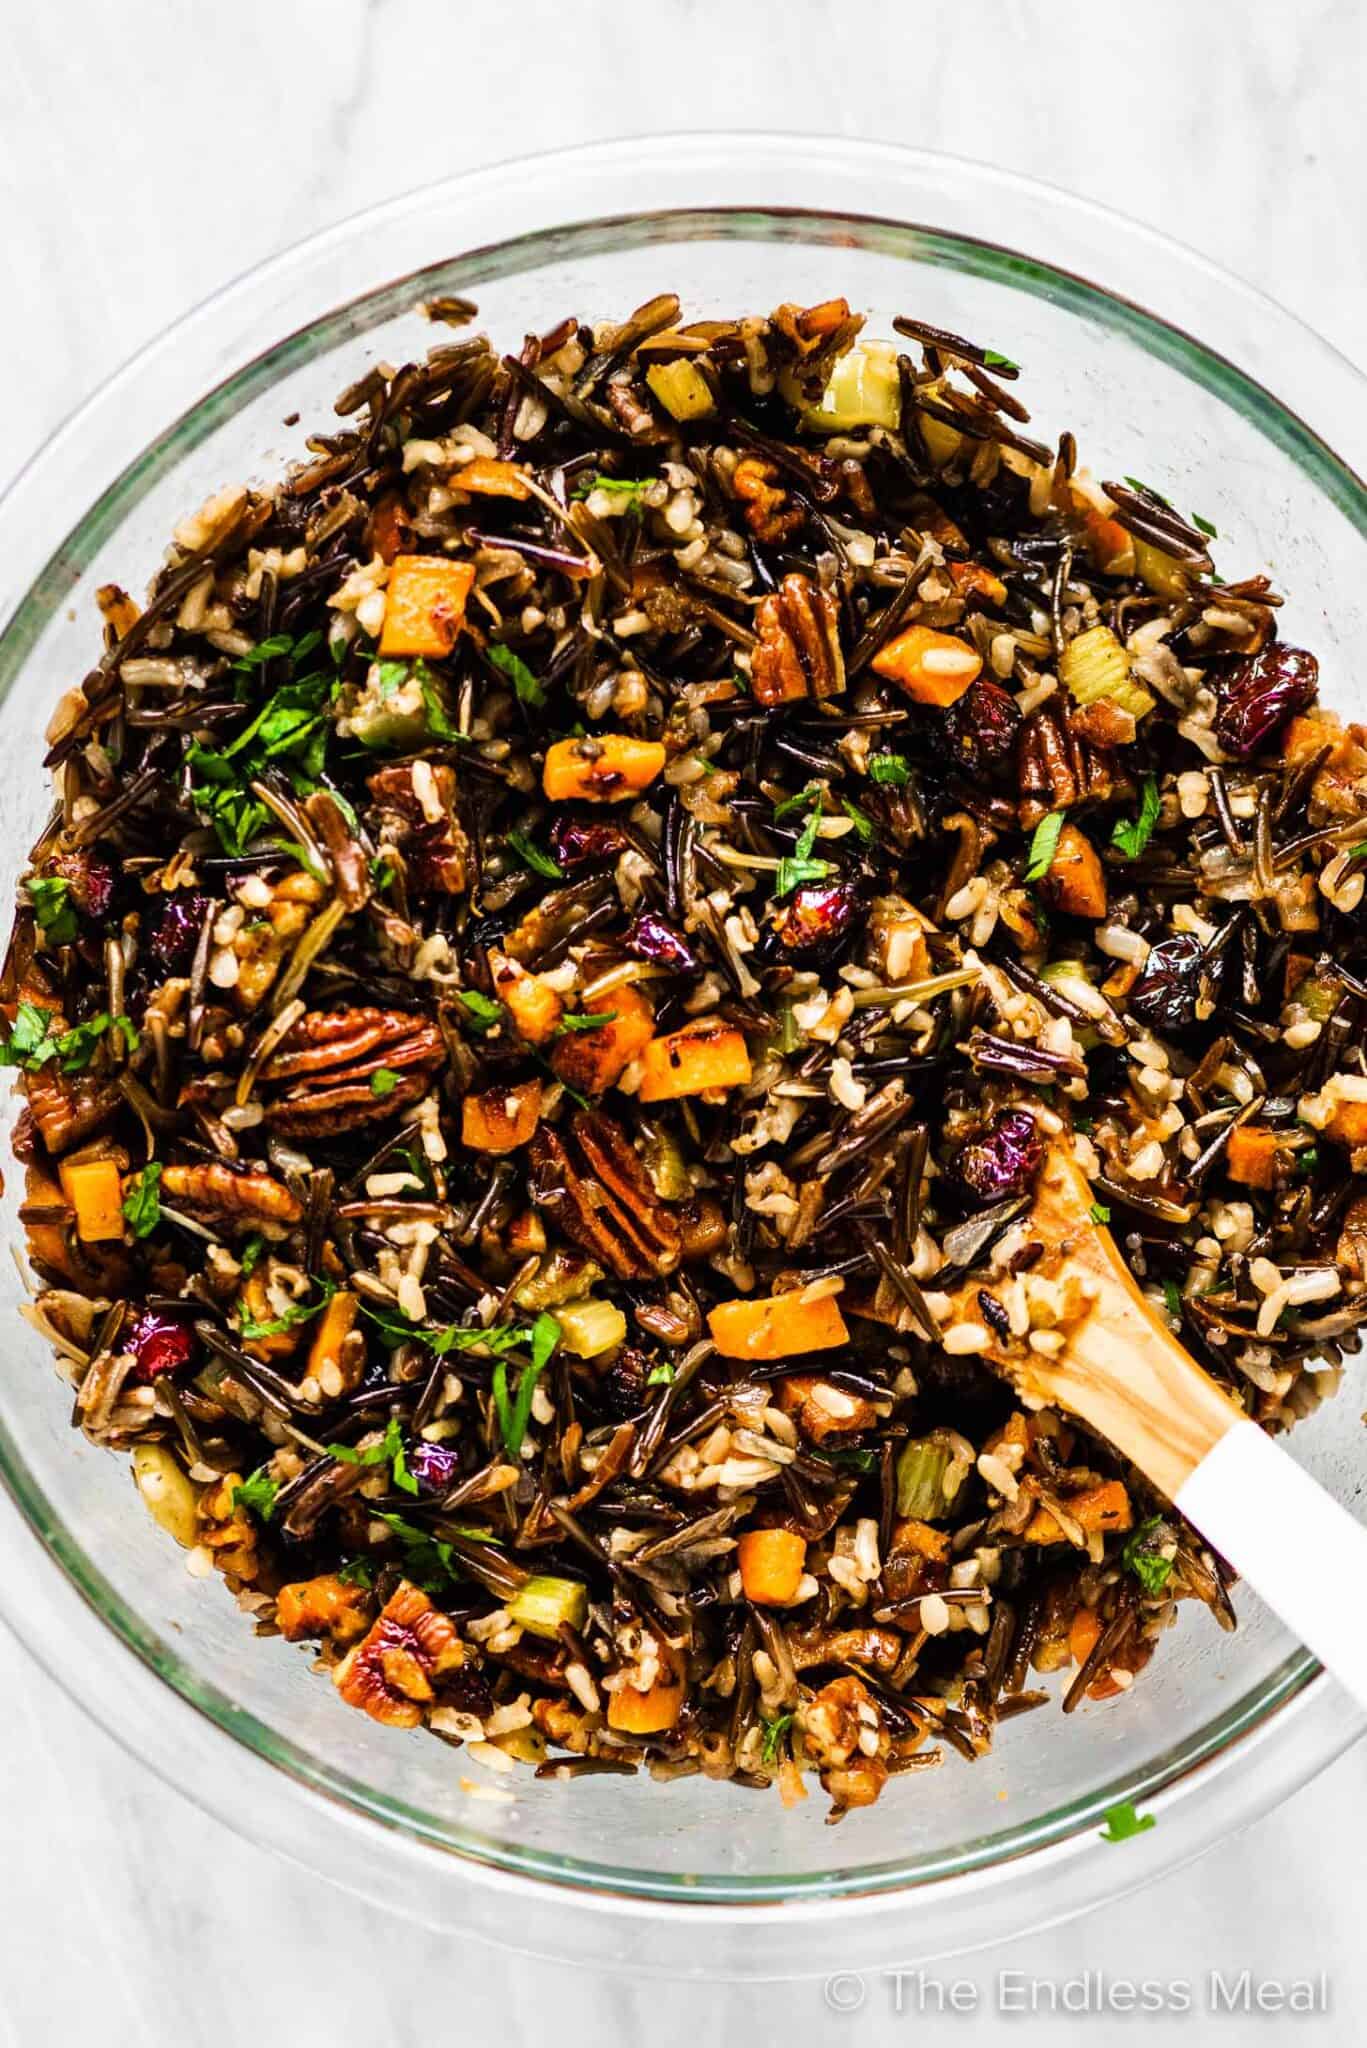 Wild rice stuffing with pecans, sweet potatoes, and cranberries in a glass bowl with a wooden spoon.